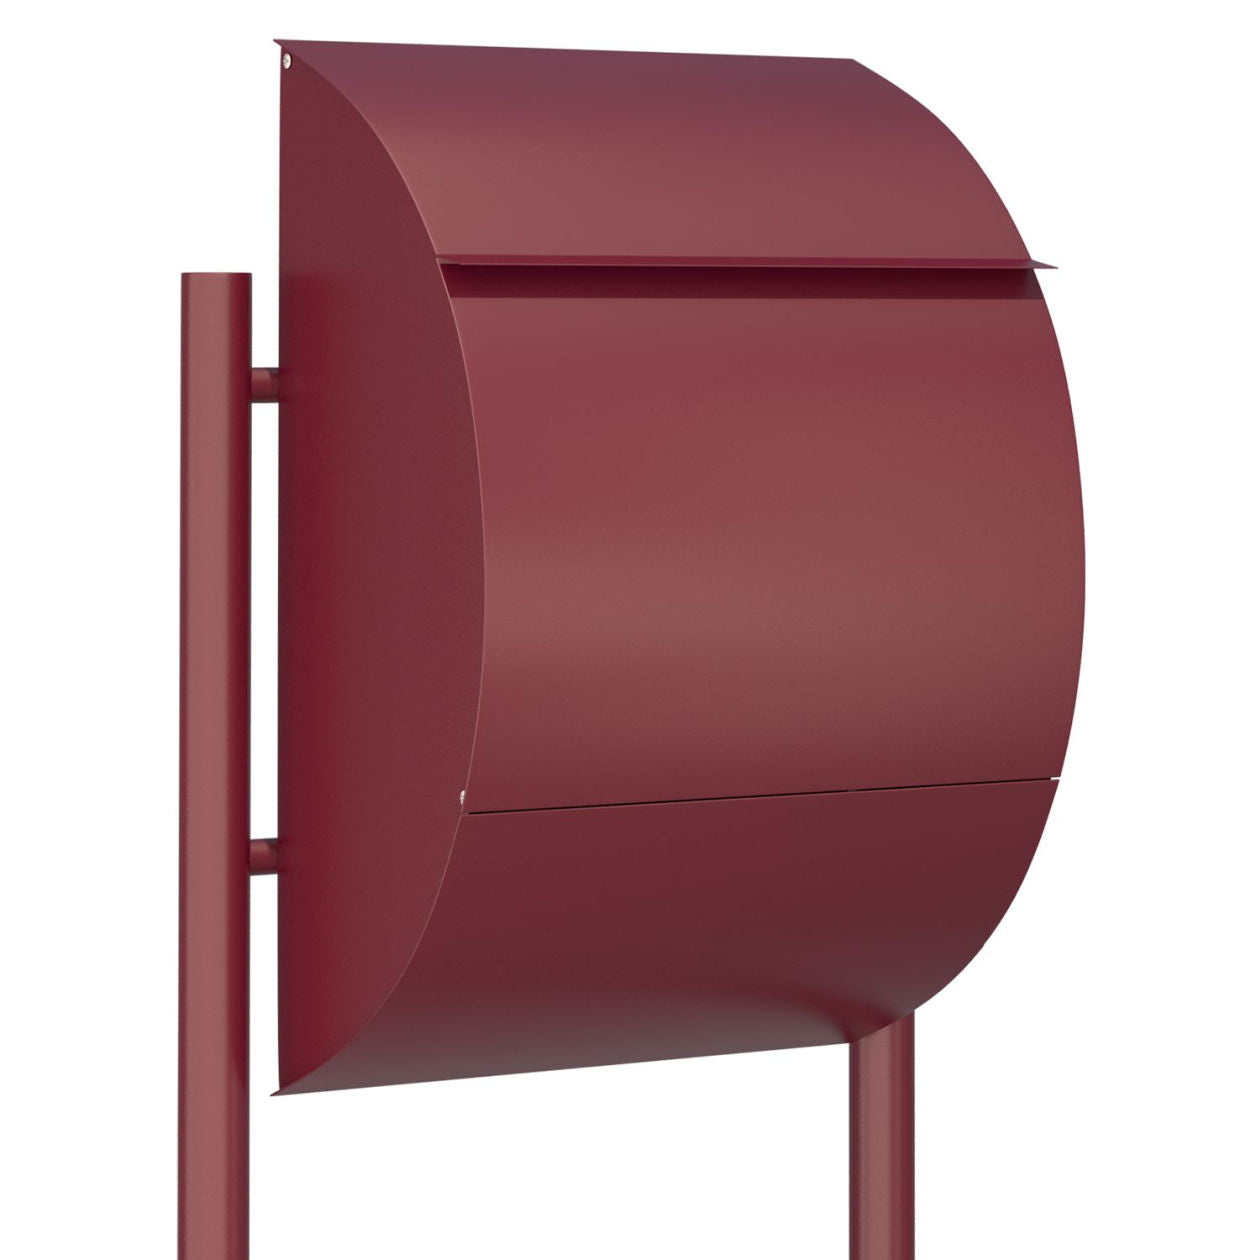 STAND JUMBO by Bravios - Modern post-mounted red mailbox